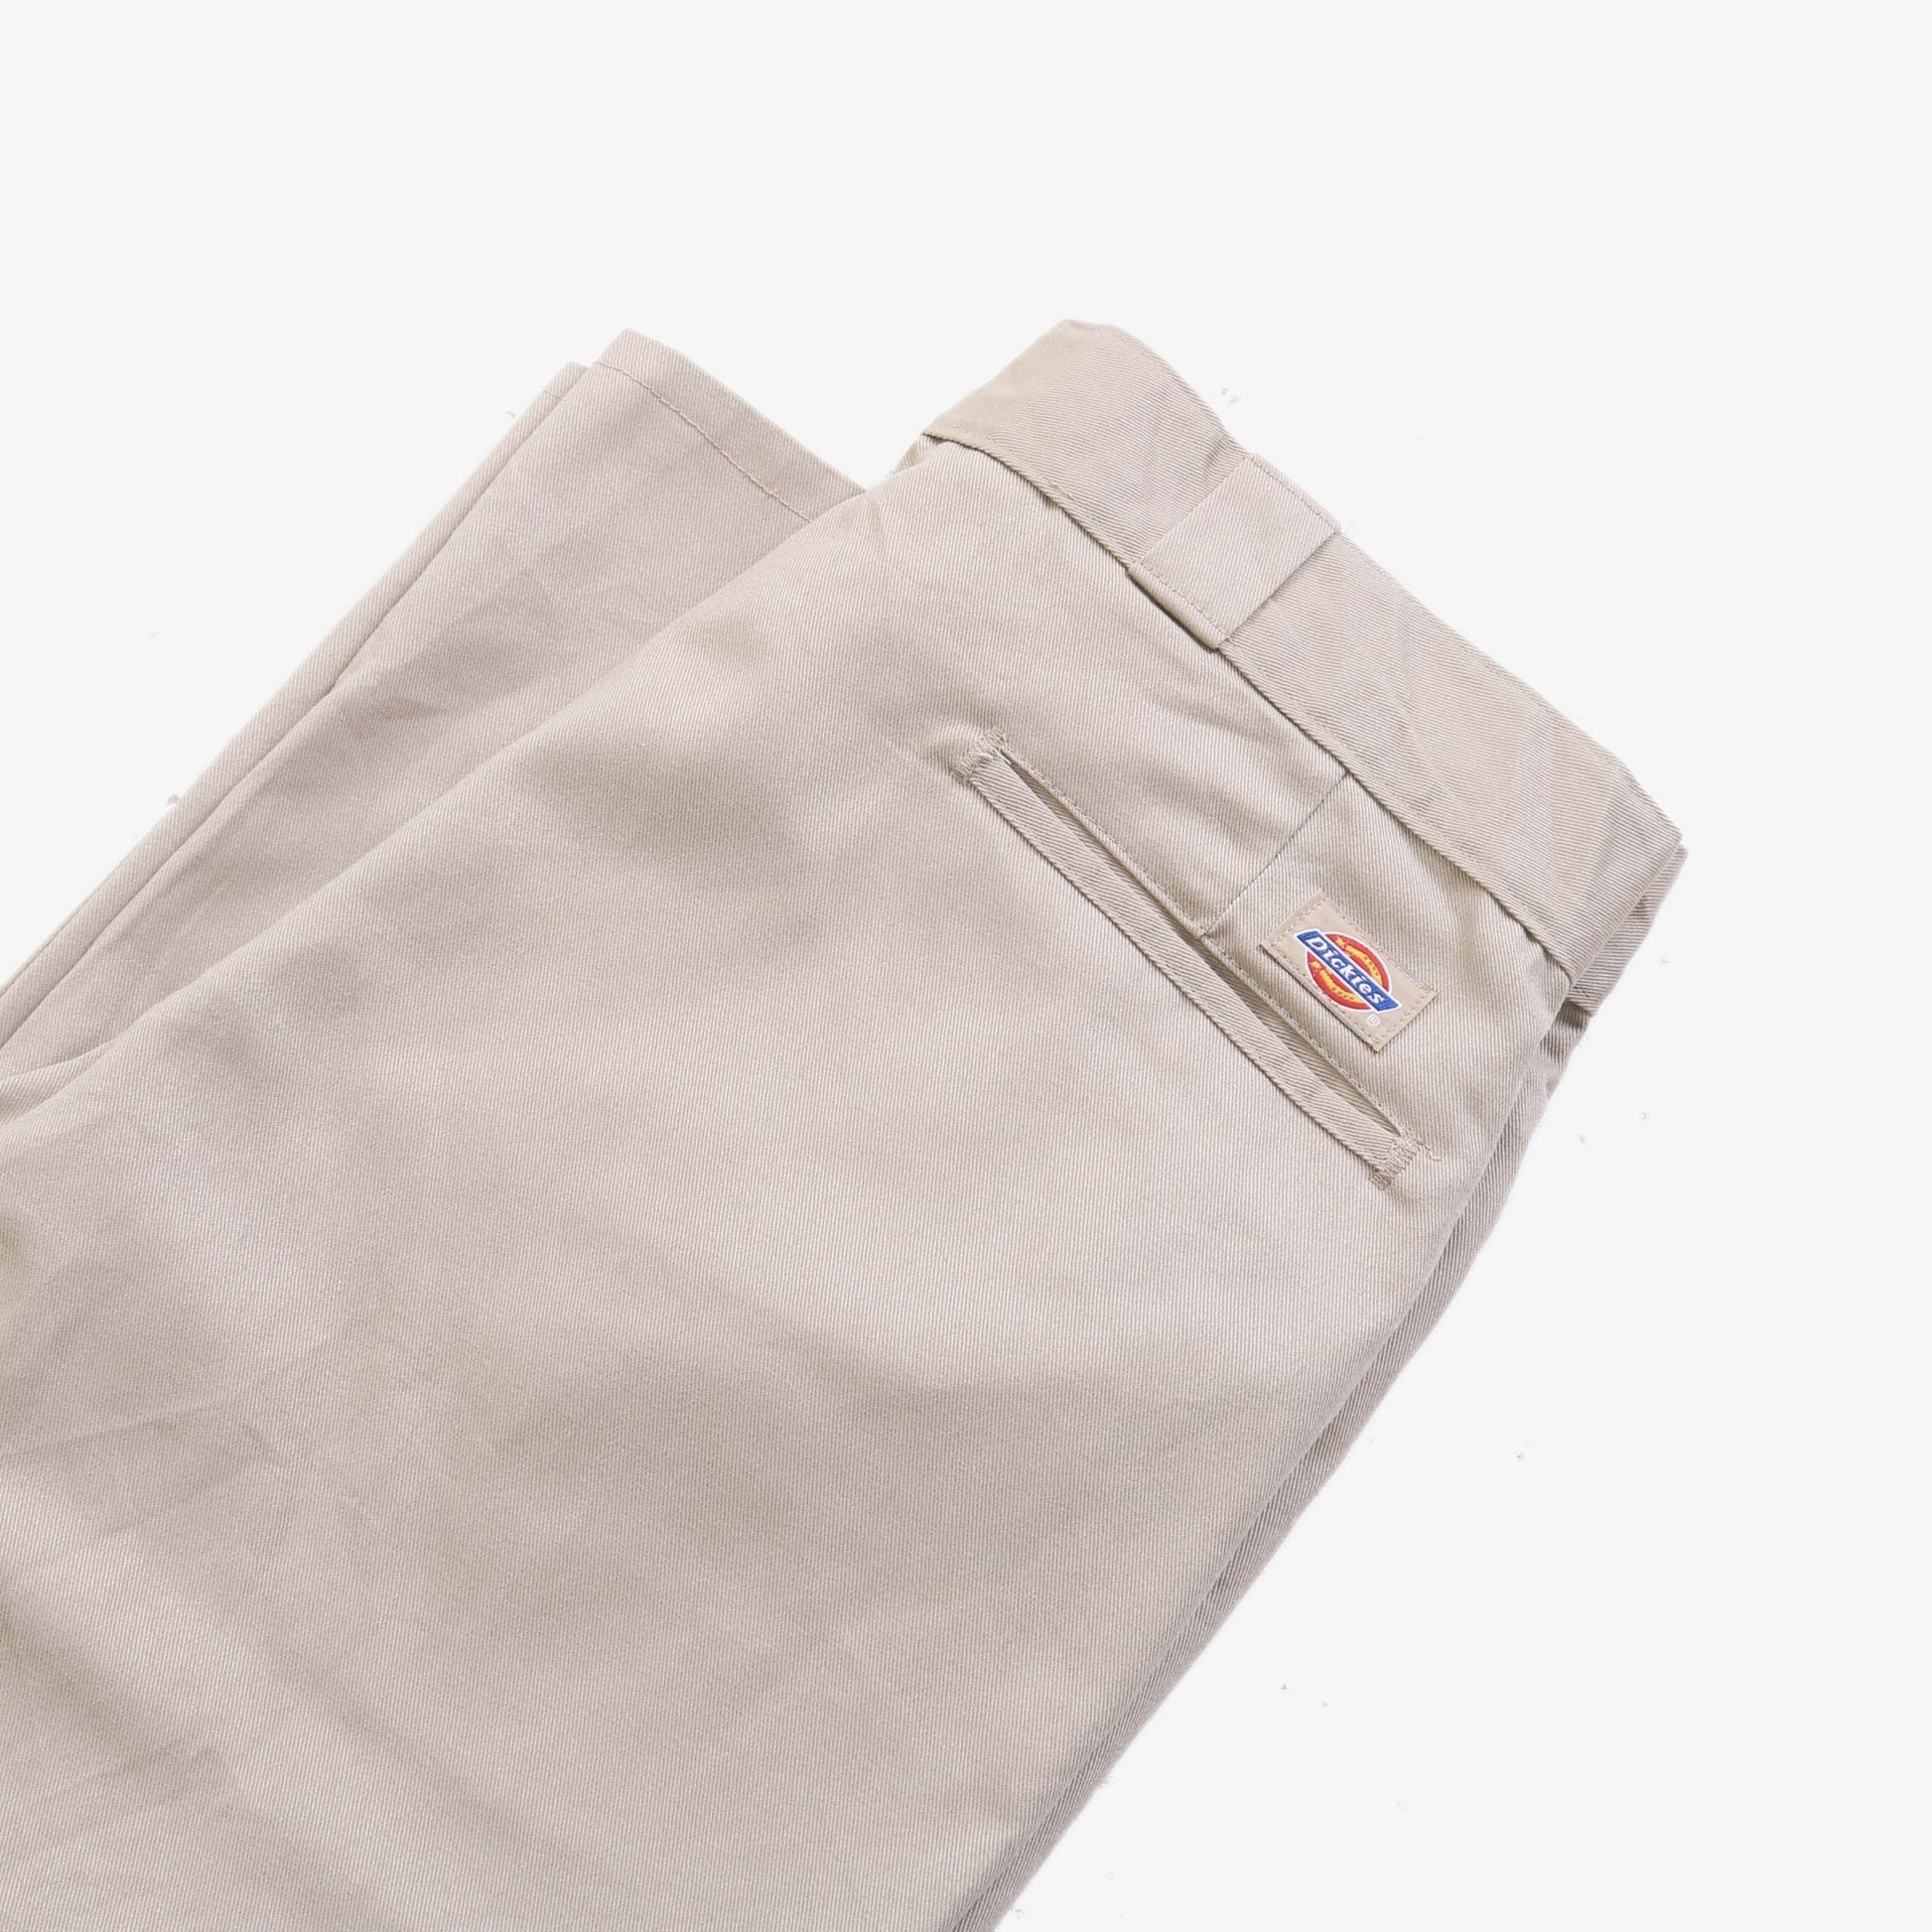 874 Work Trousers - Beige - 38/31 - American Madness